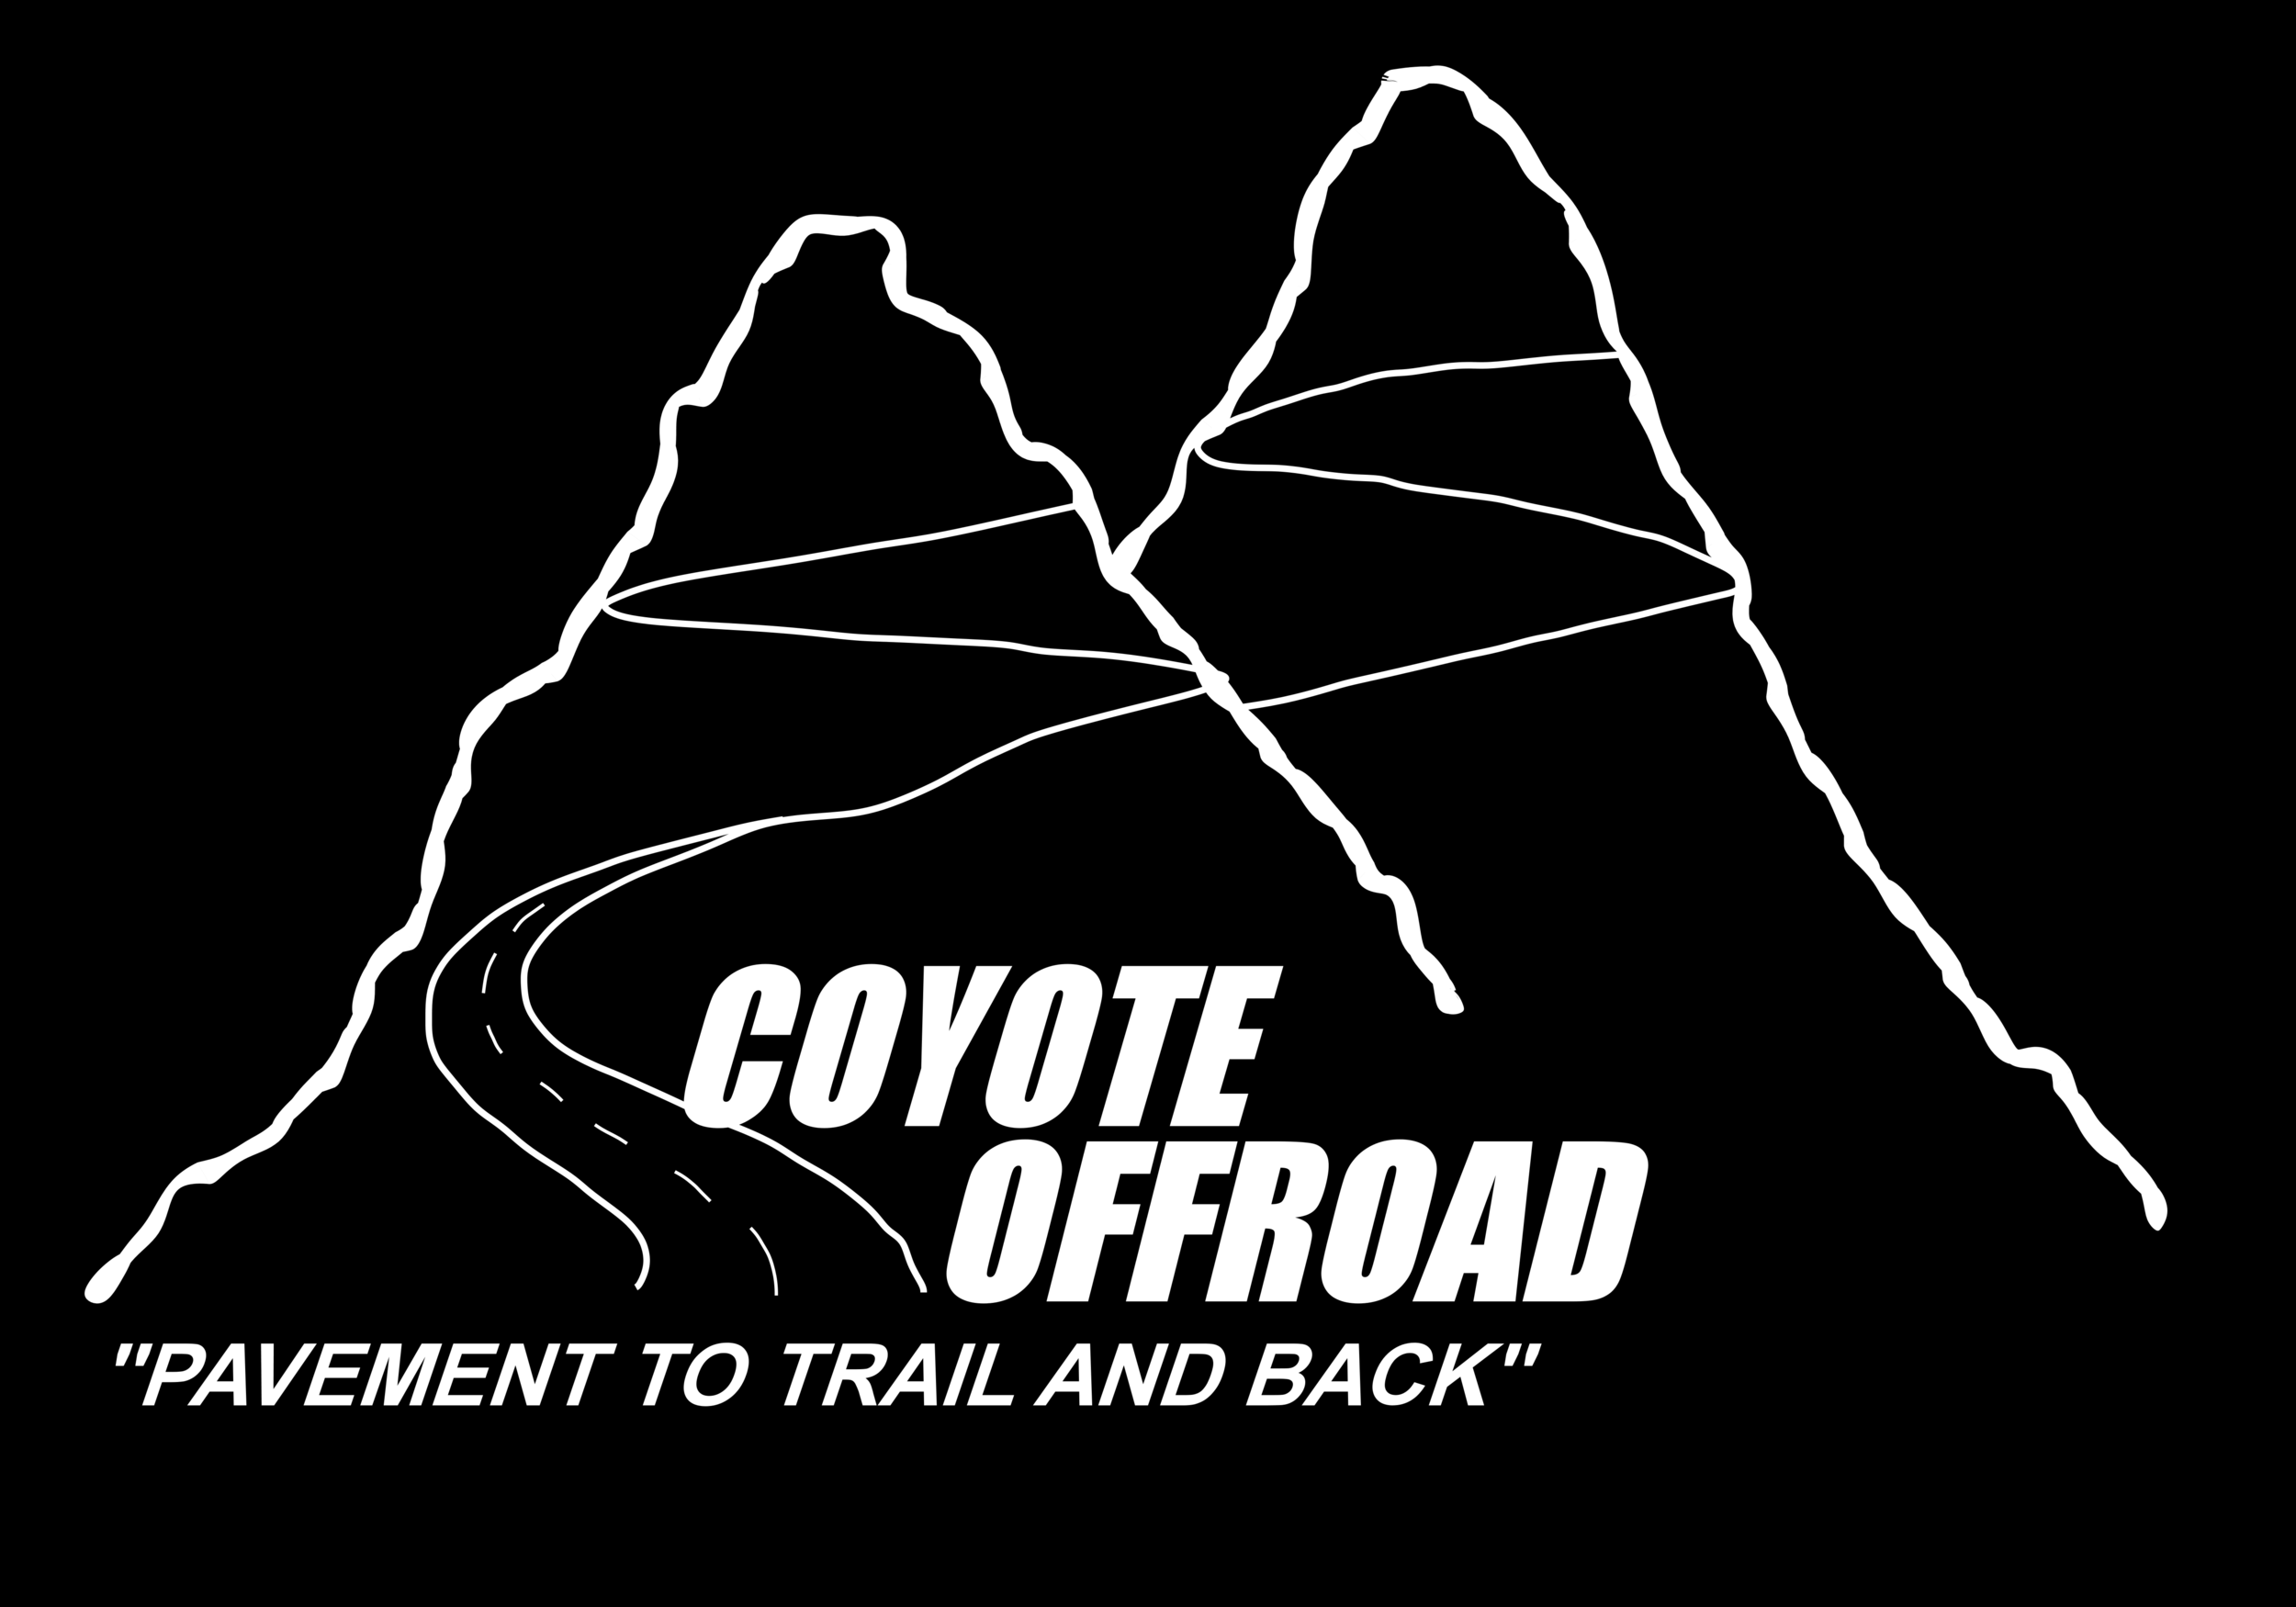 Coyote Offroad